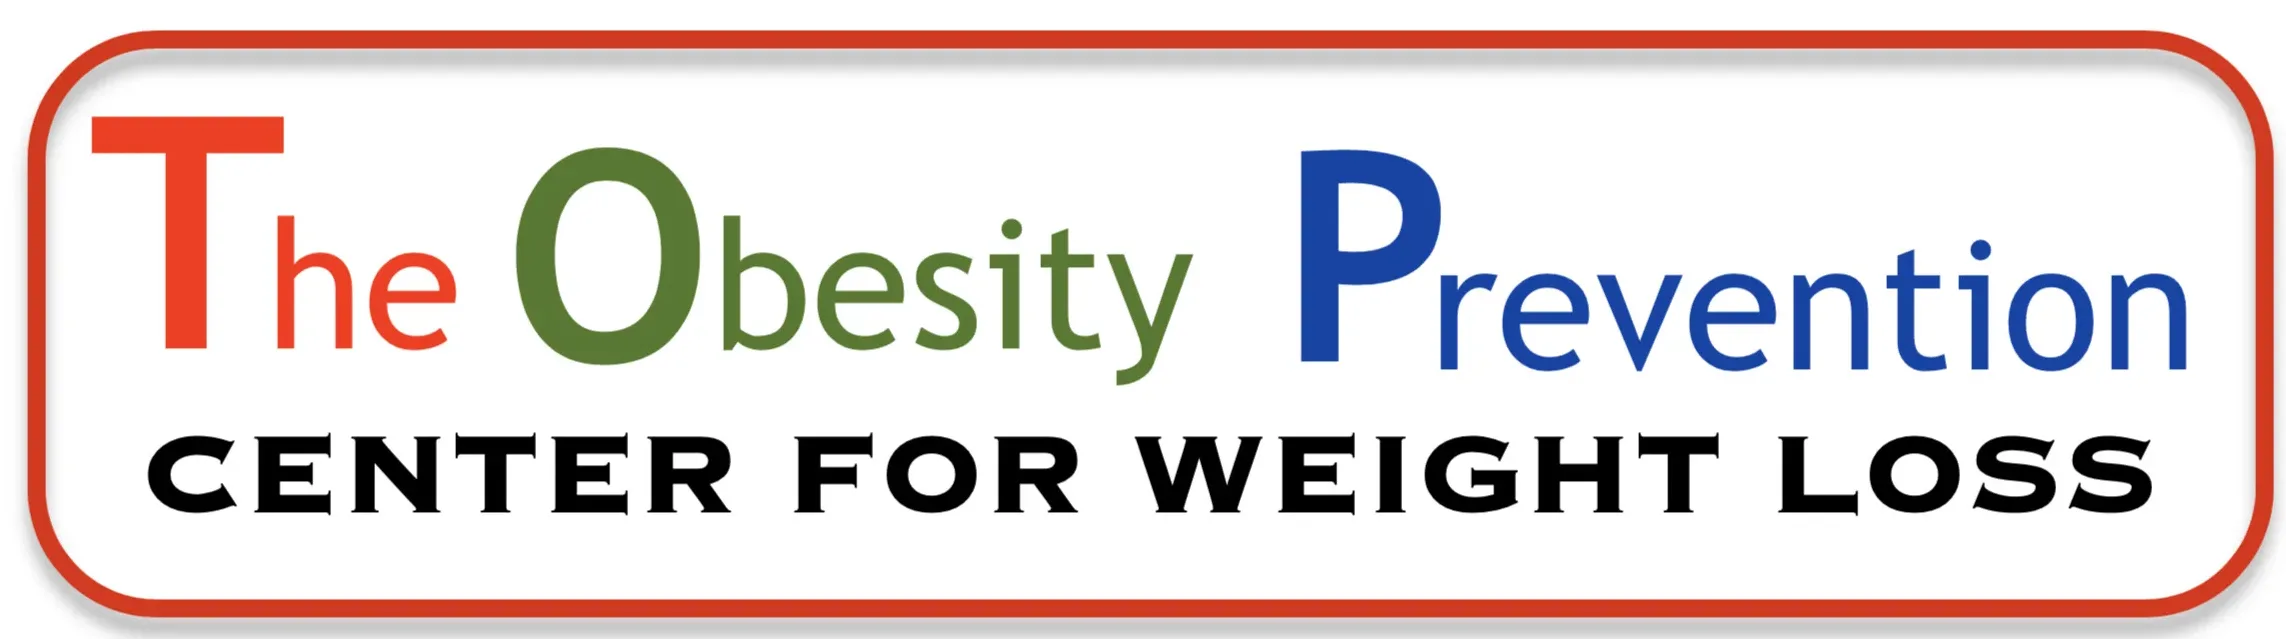 The Obesity Prevention Center for Weight Loss